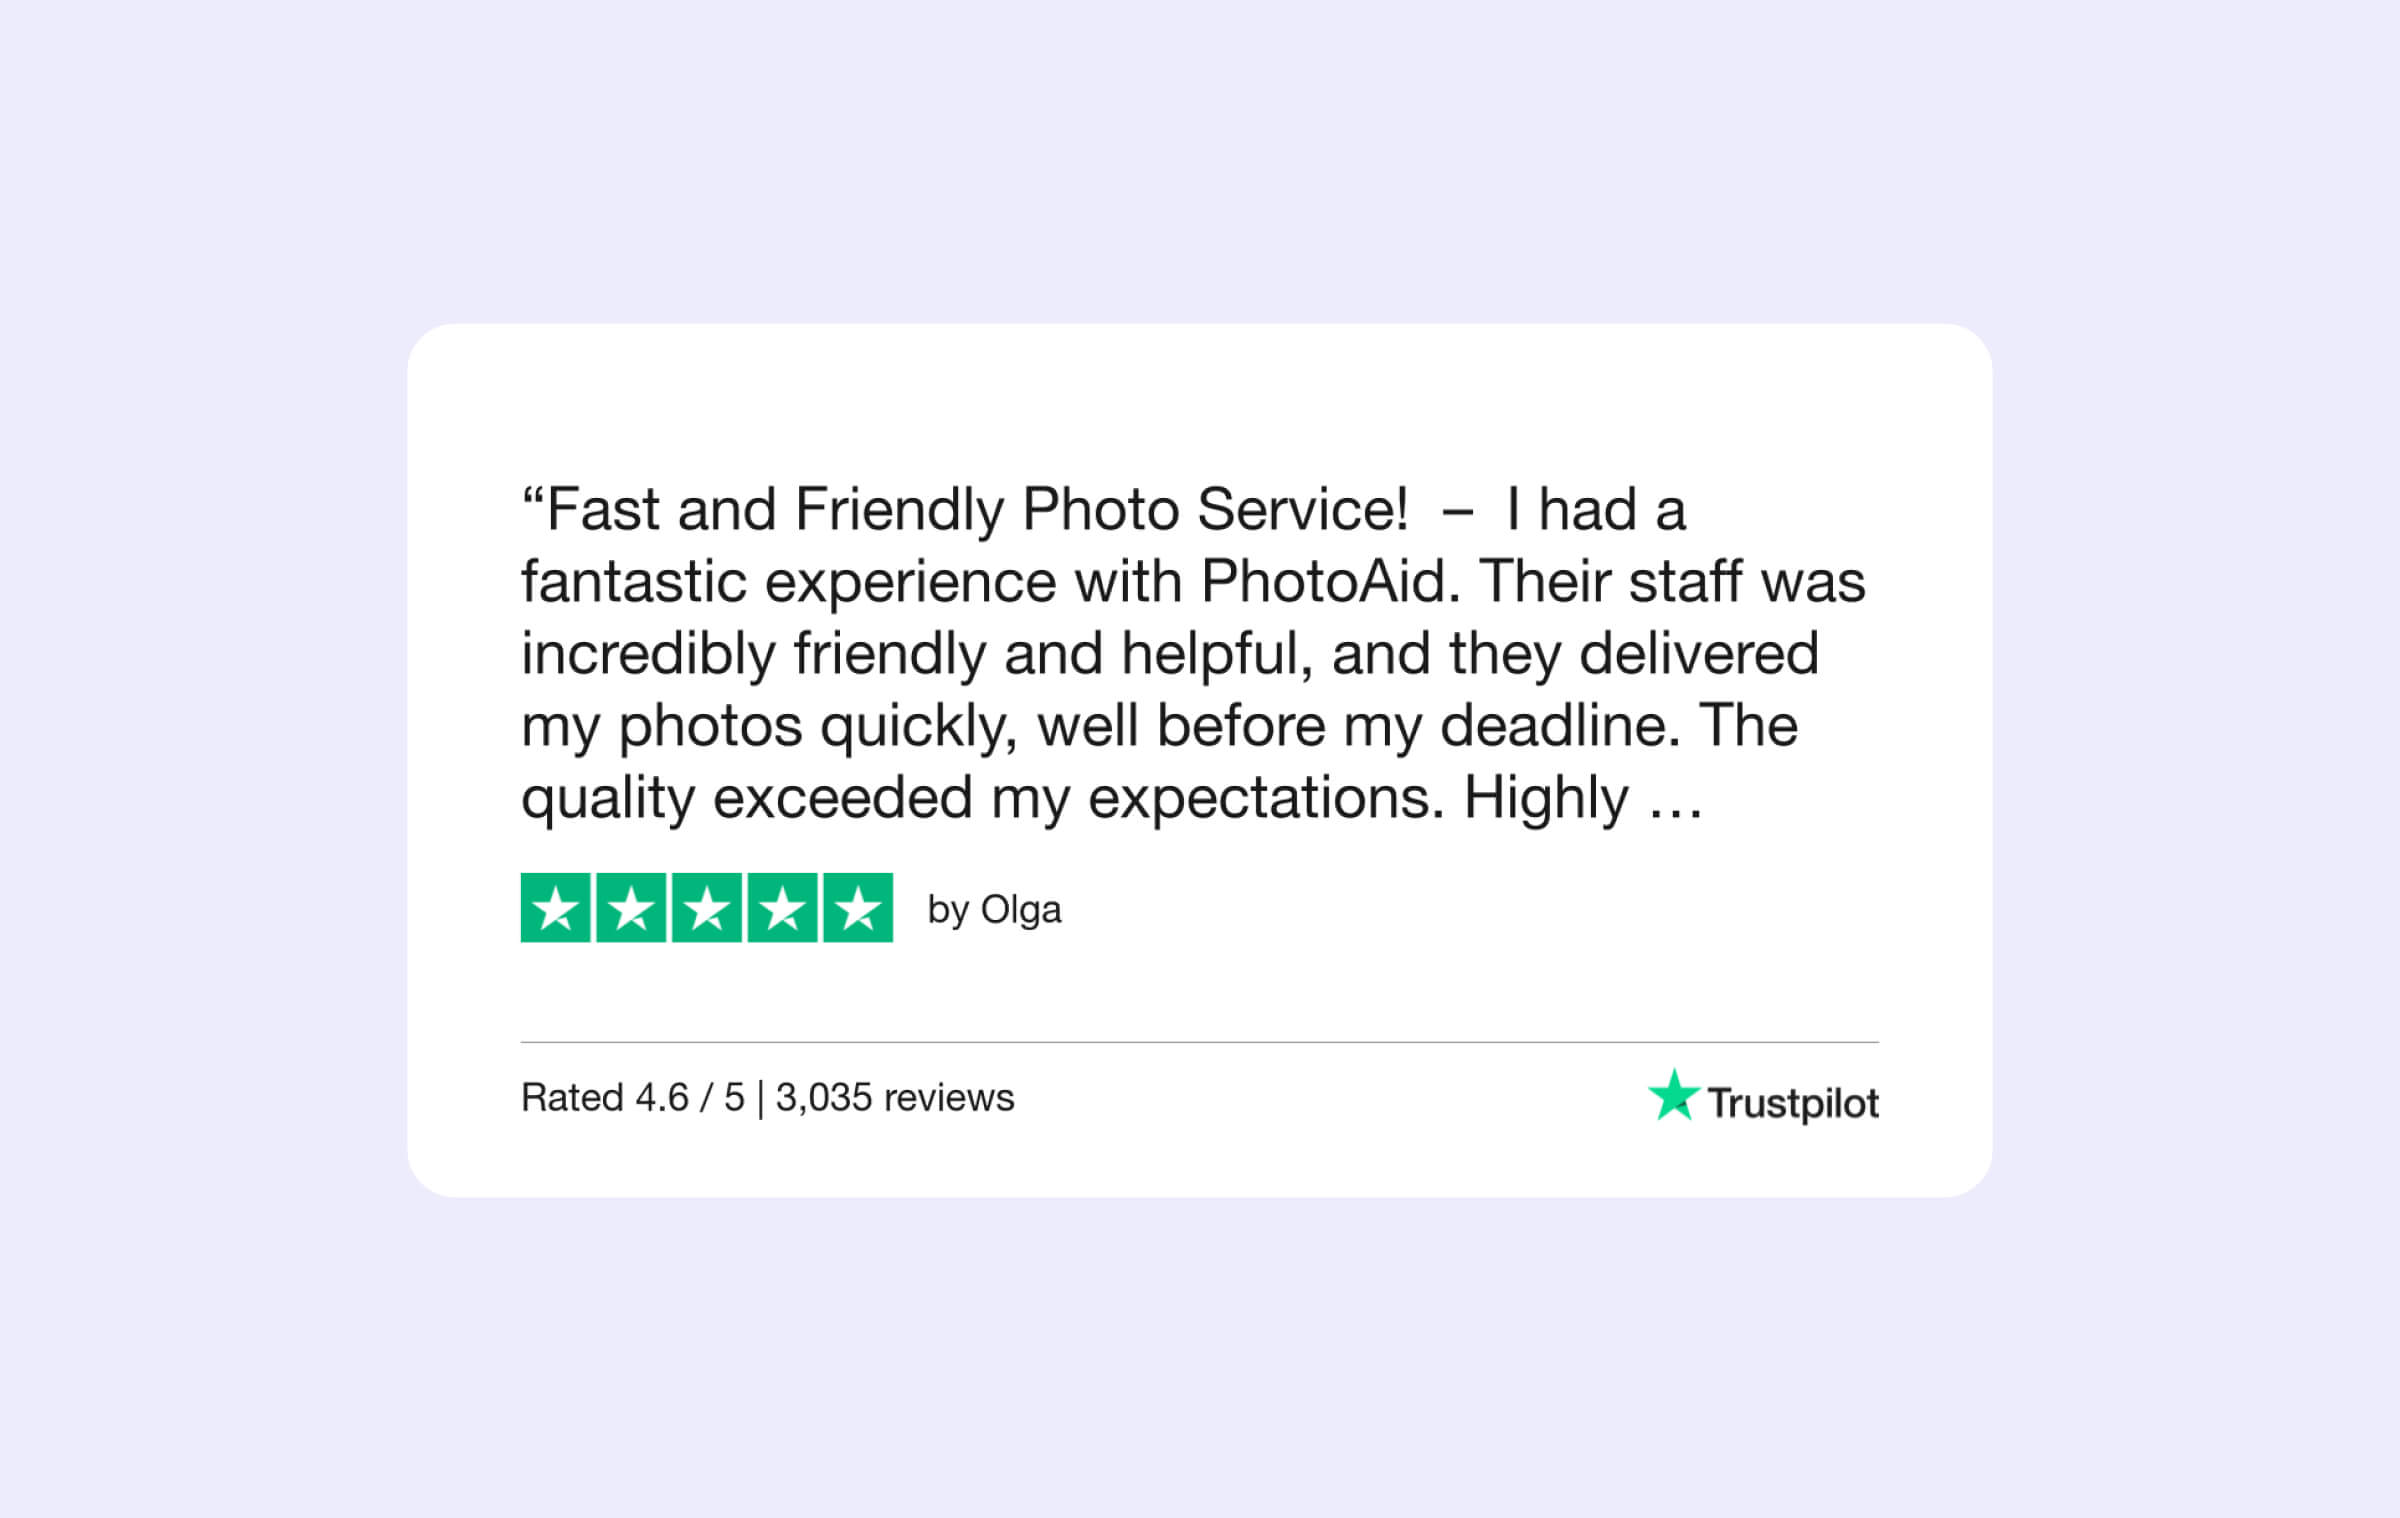 A 5-star review from a satisfied user who recently purchased German passport photos with Passport Photo Online.